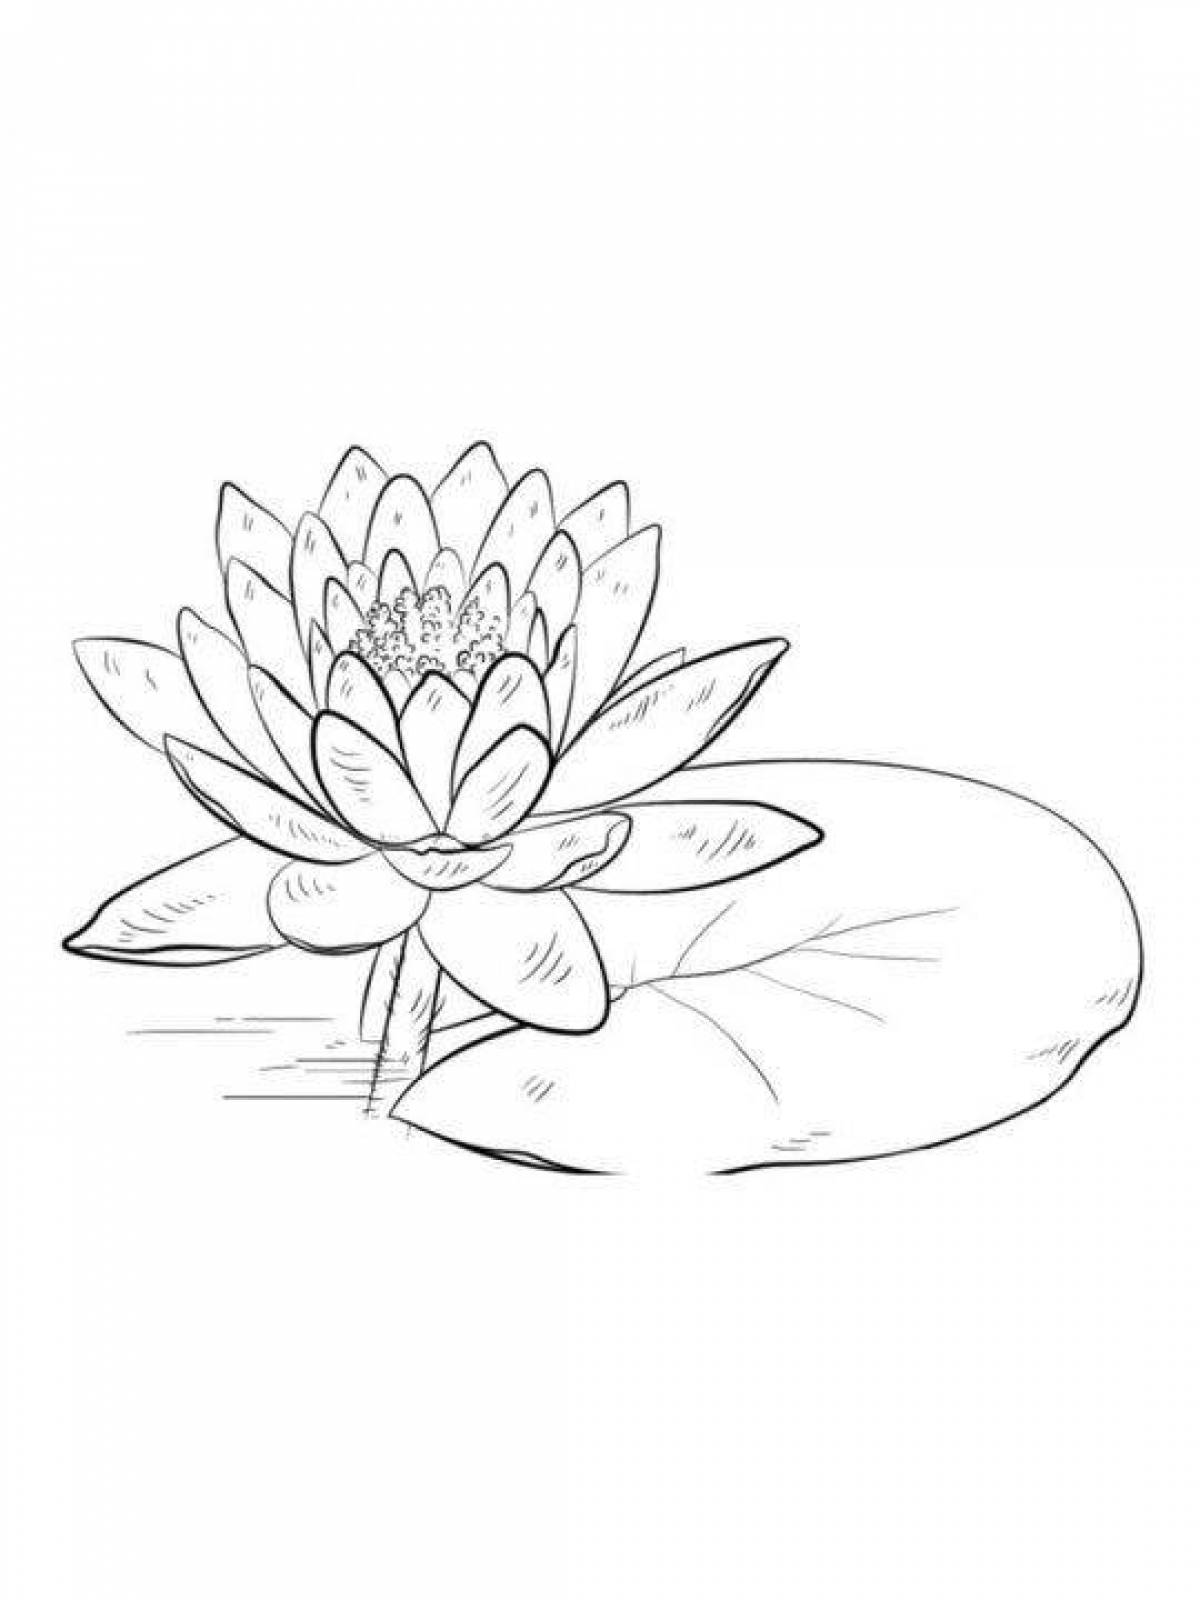 Coloring bright white water lily